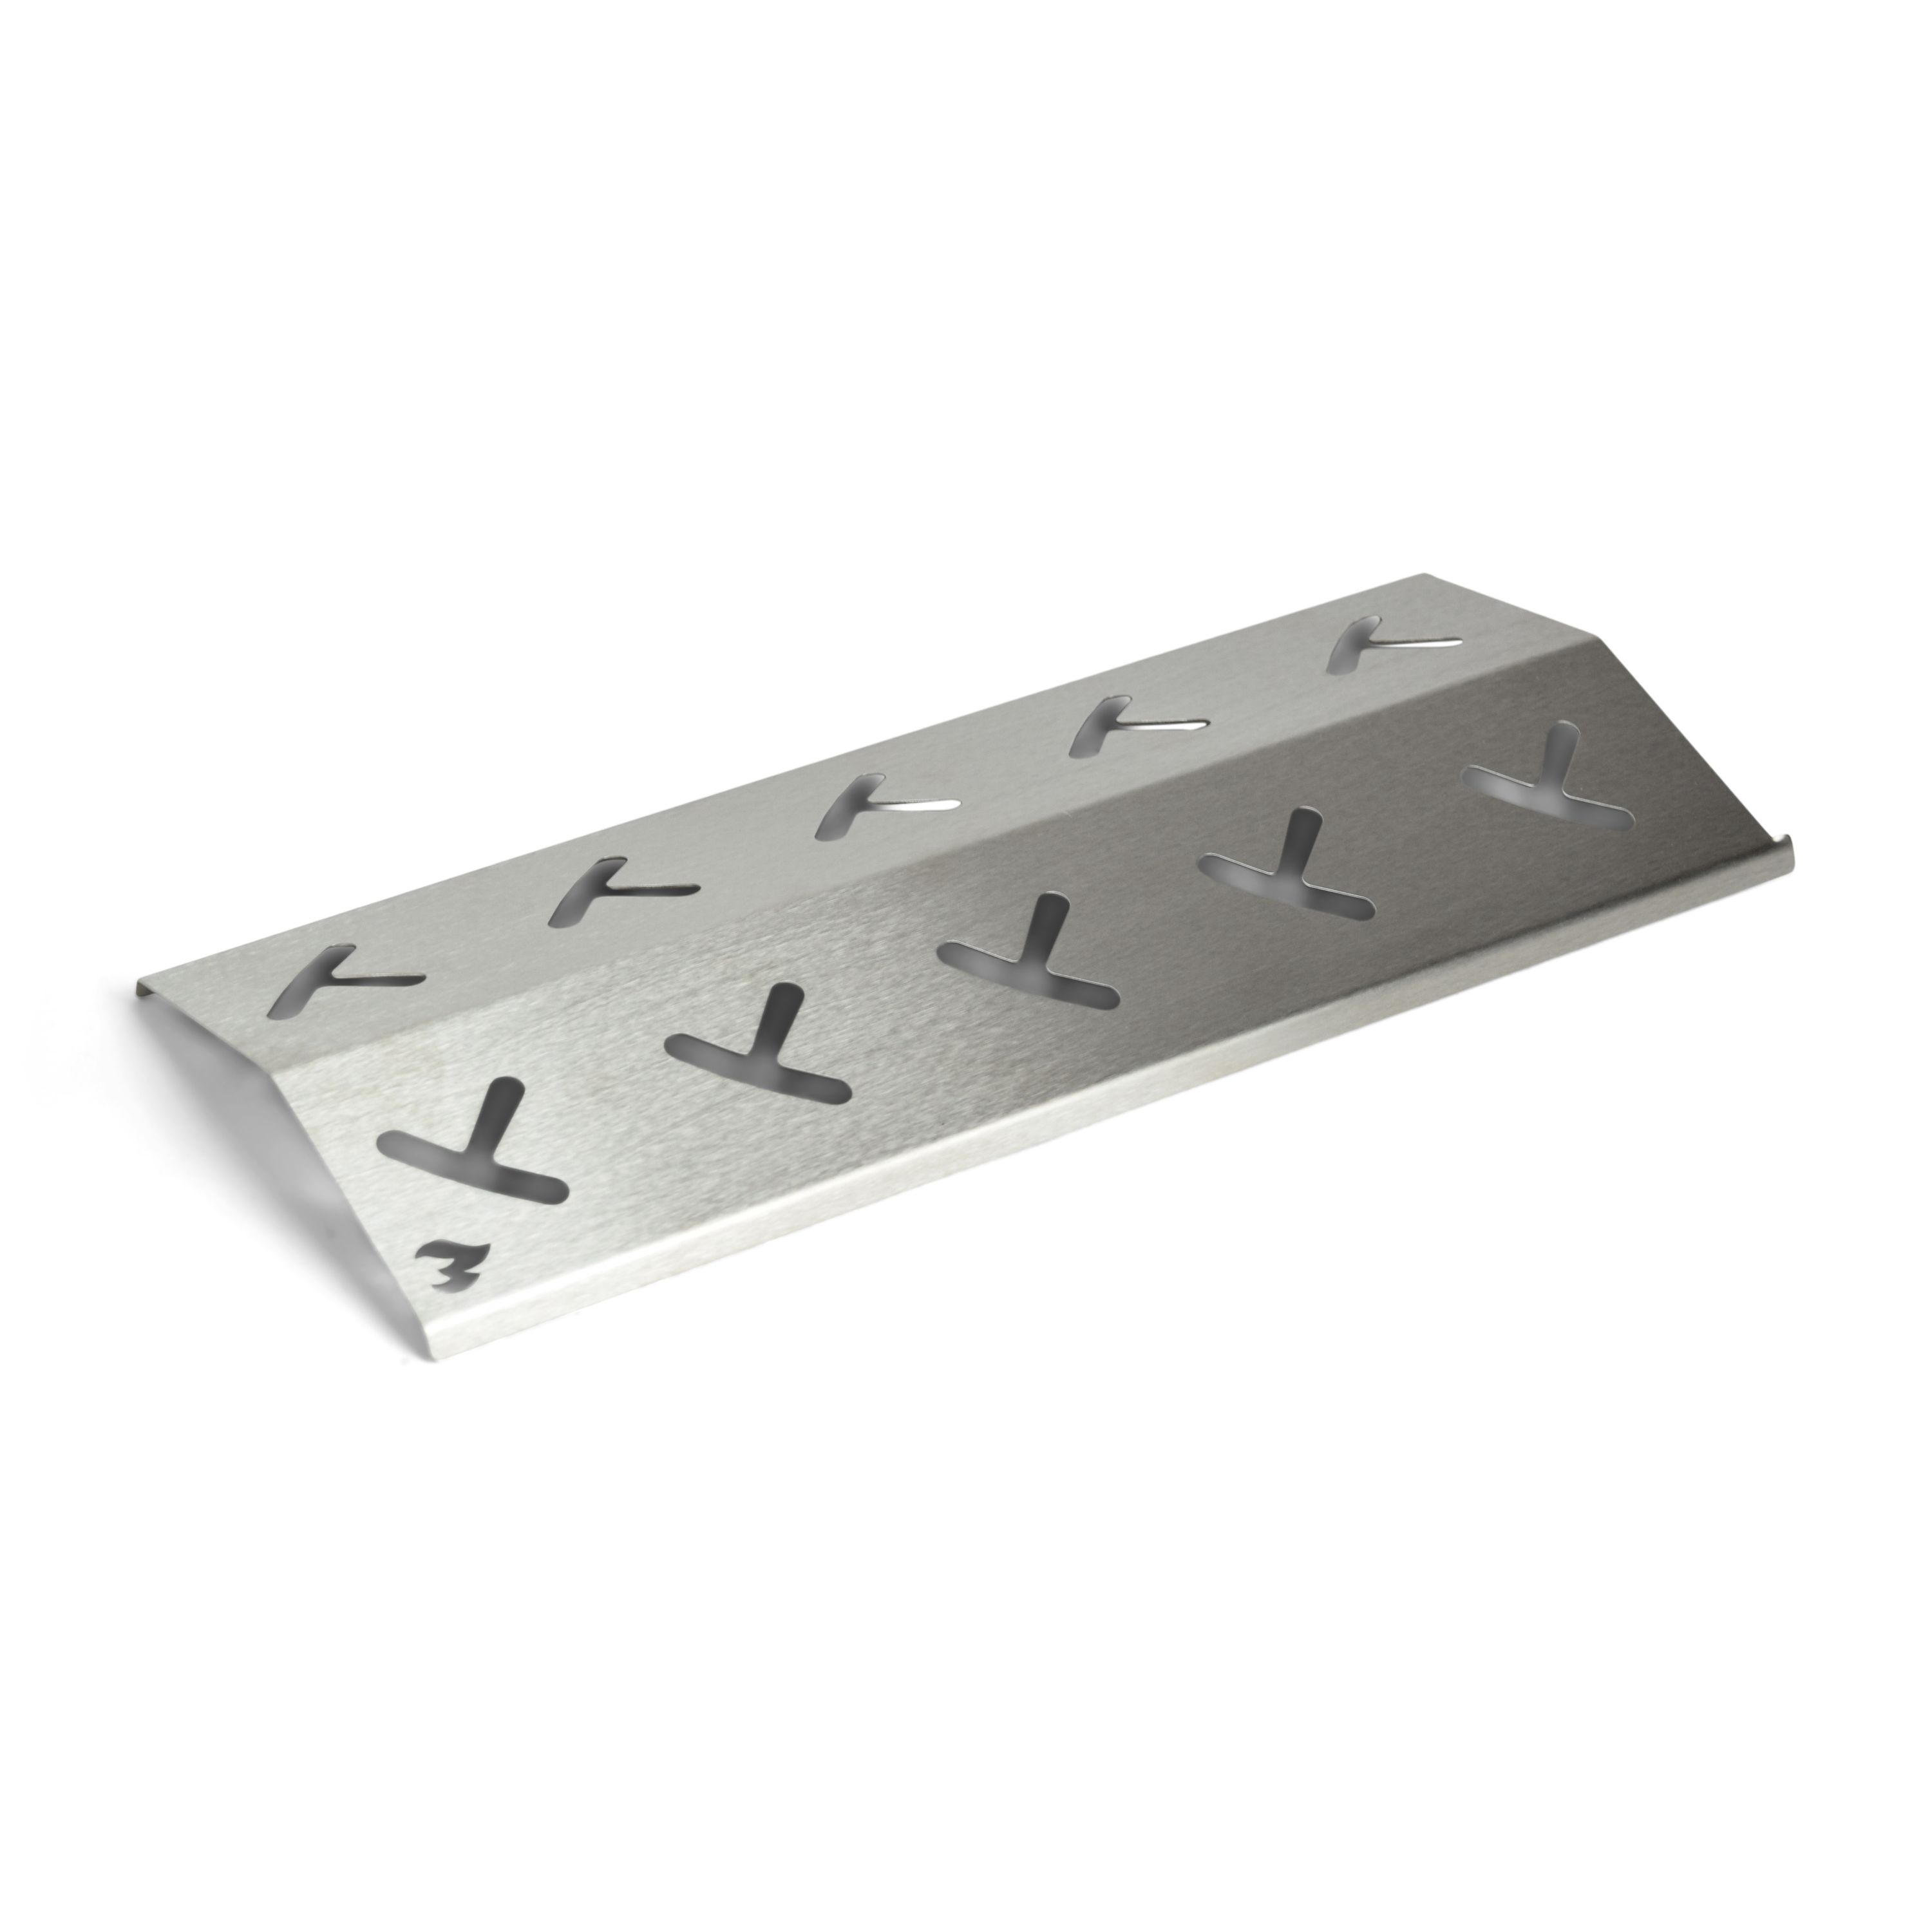 Stainless steel flavouring bar for Enders